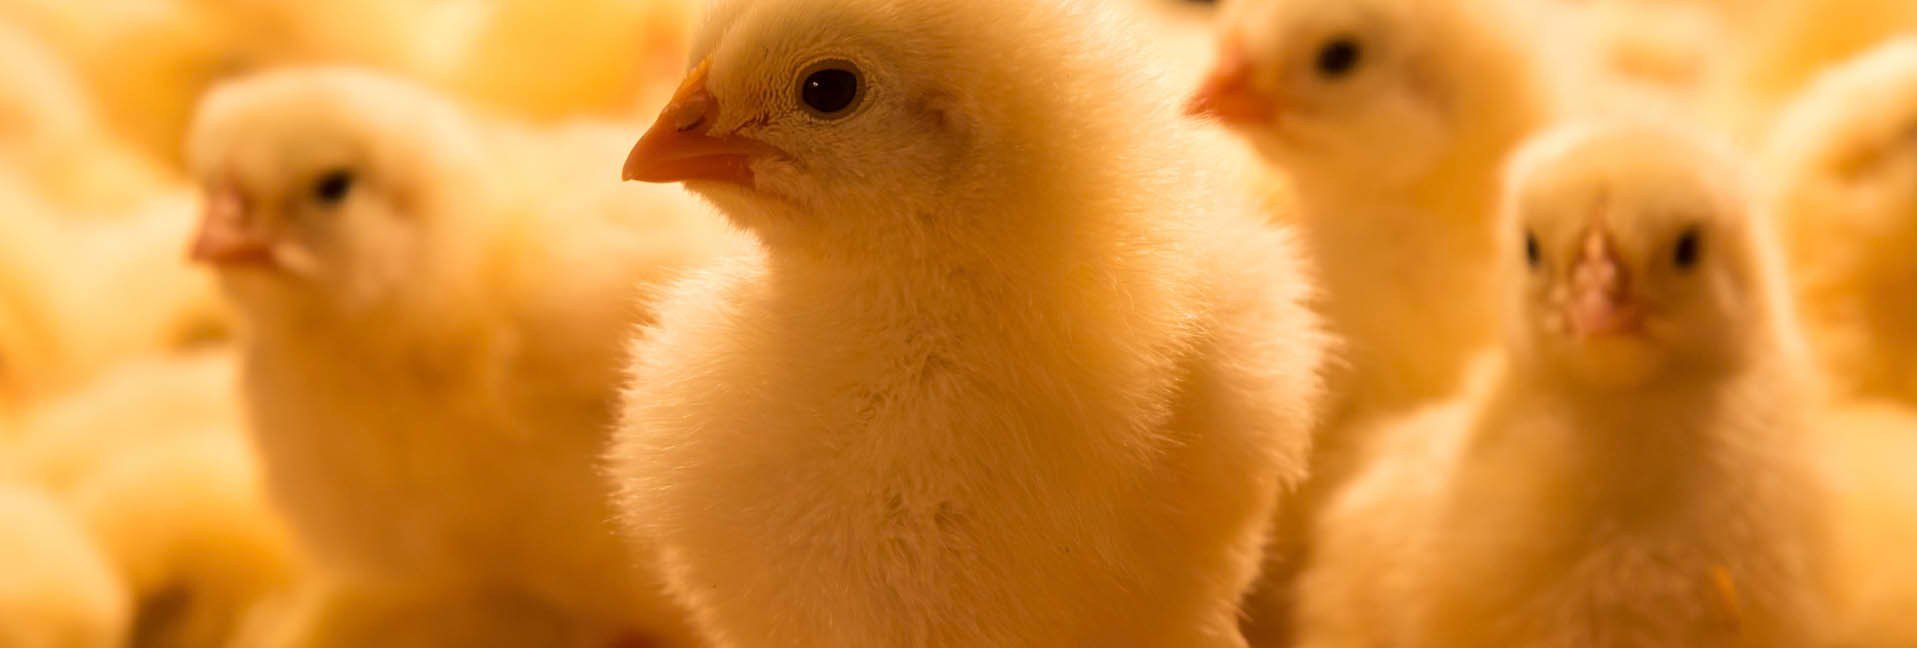 A Homemade Brooder - Setting one up is easier than you think